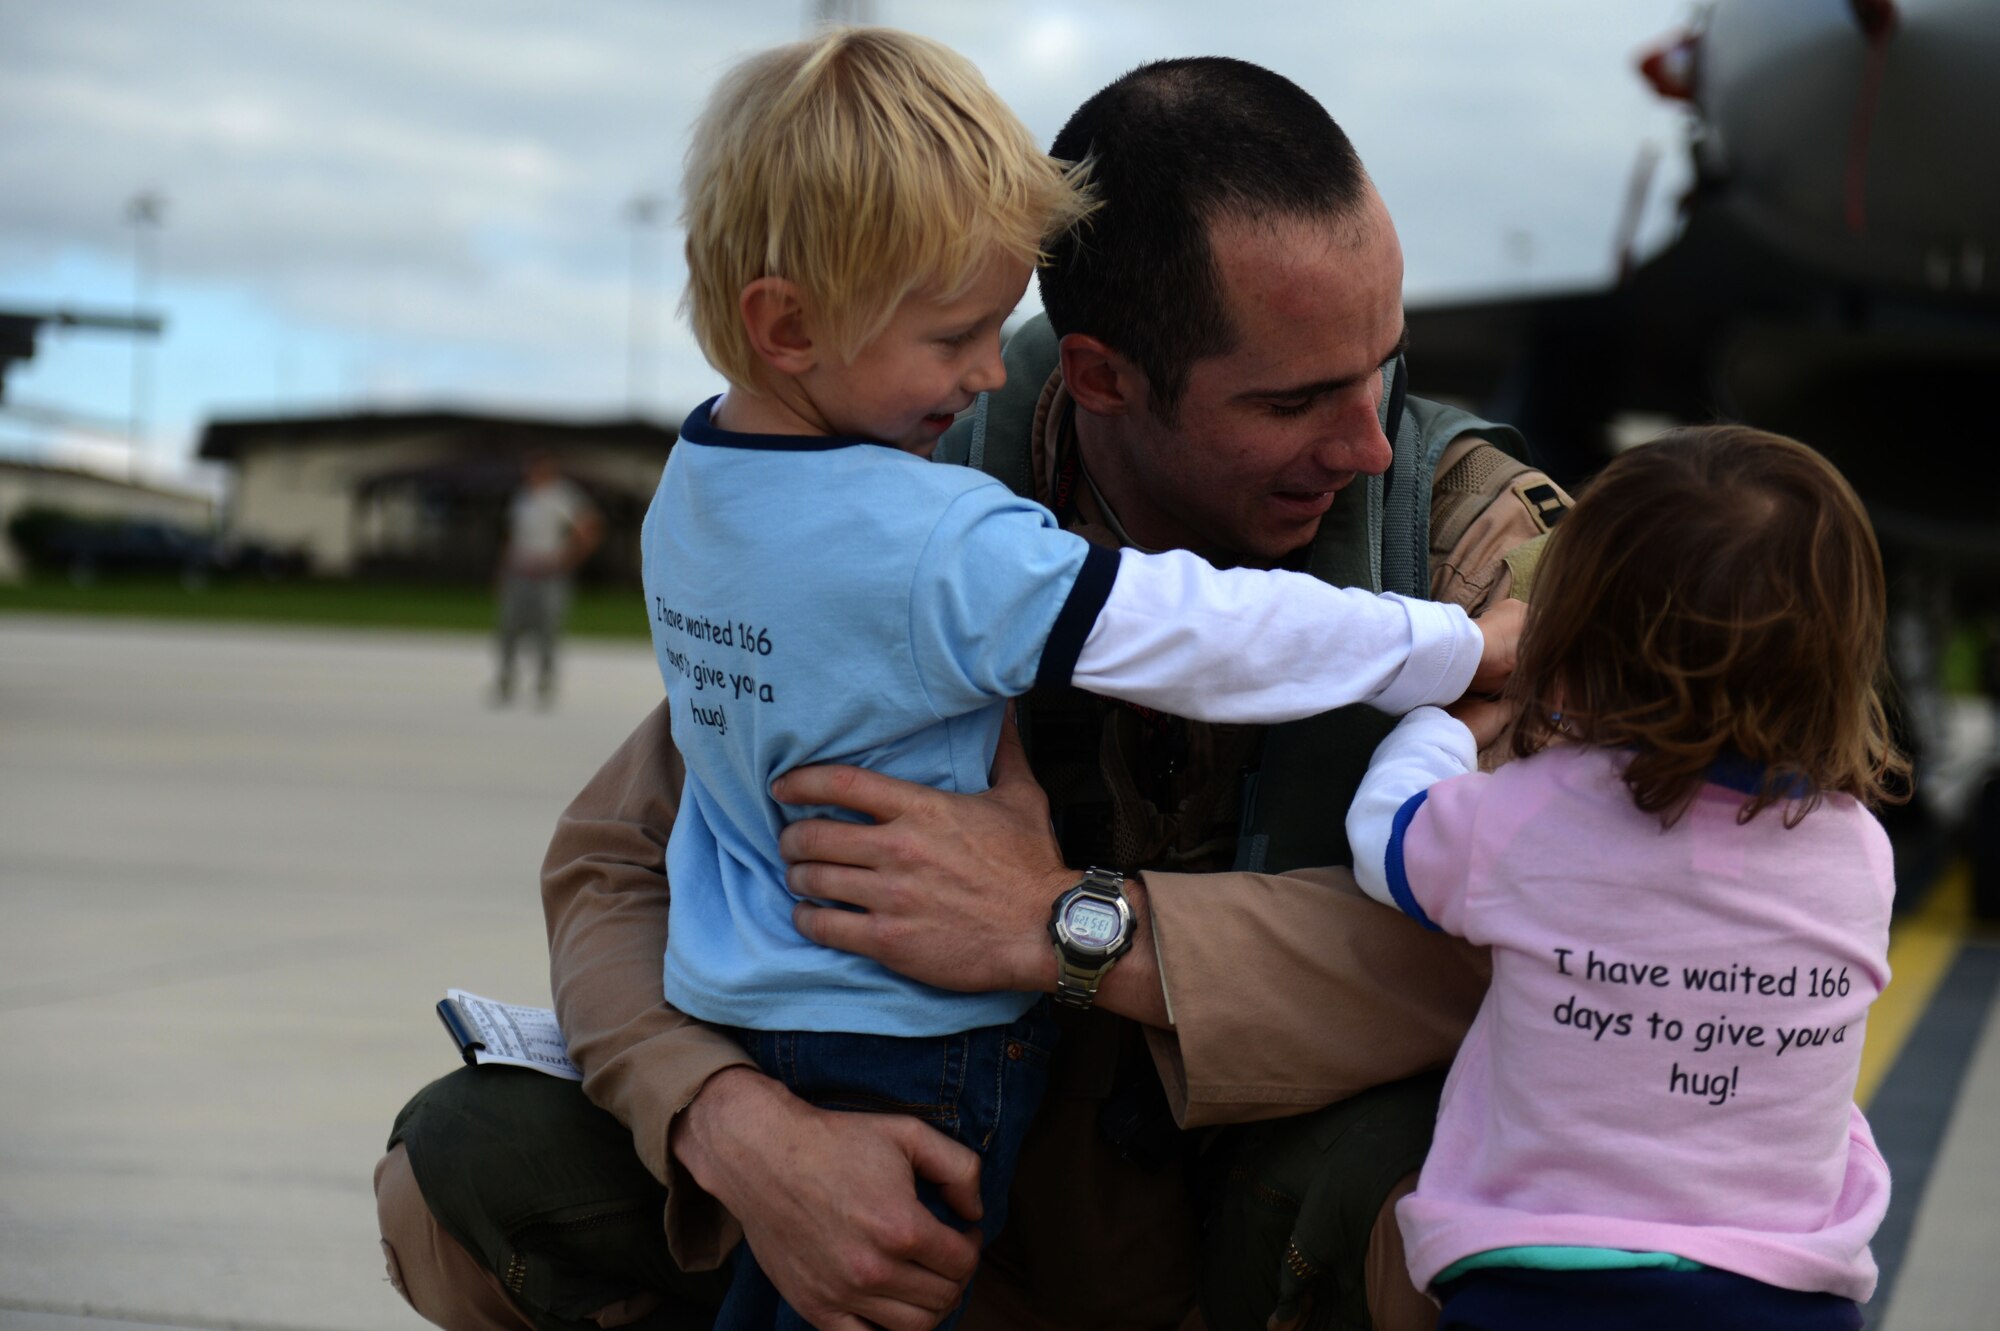 SPANGDAHLEM AIR BASE, Germany – U.S. Air Force Capt. Lance Ferguson, 480th Fighter Squadron pilot from Adrian, Mich., greets his family Sept. 15, 2013, after the squadron's deployment to an undisclosed location in Southwest Asia. The 480th FS Airmen and aircraft deployed in support of Operation Enduring Freedom. (U.S. Air Force photo by Airman 1st Class Gustavo Castillo/Released)